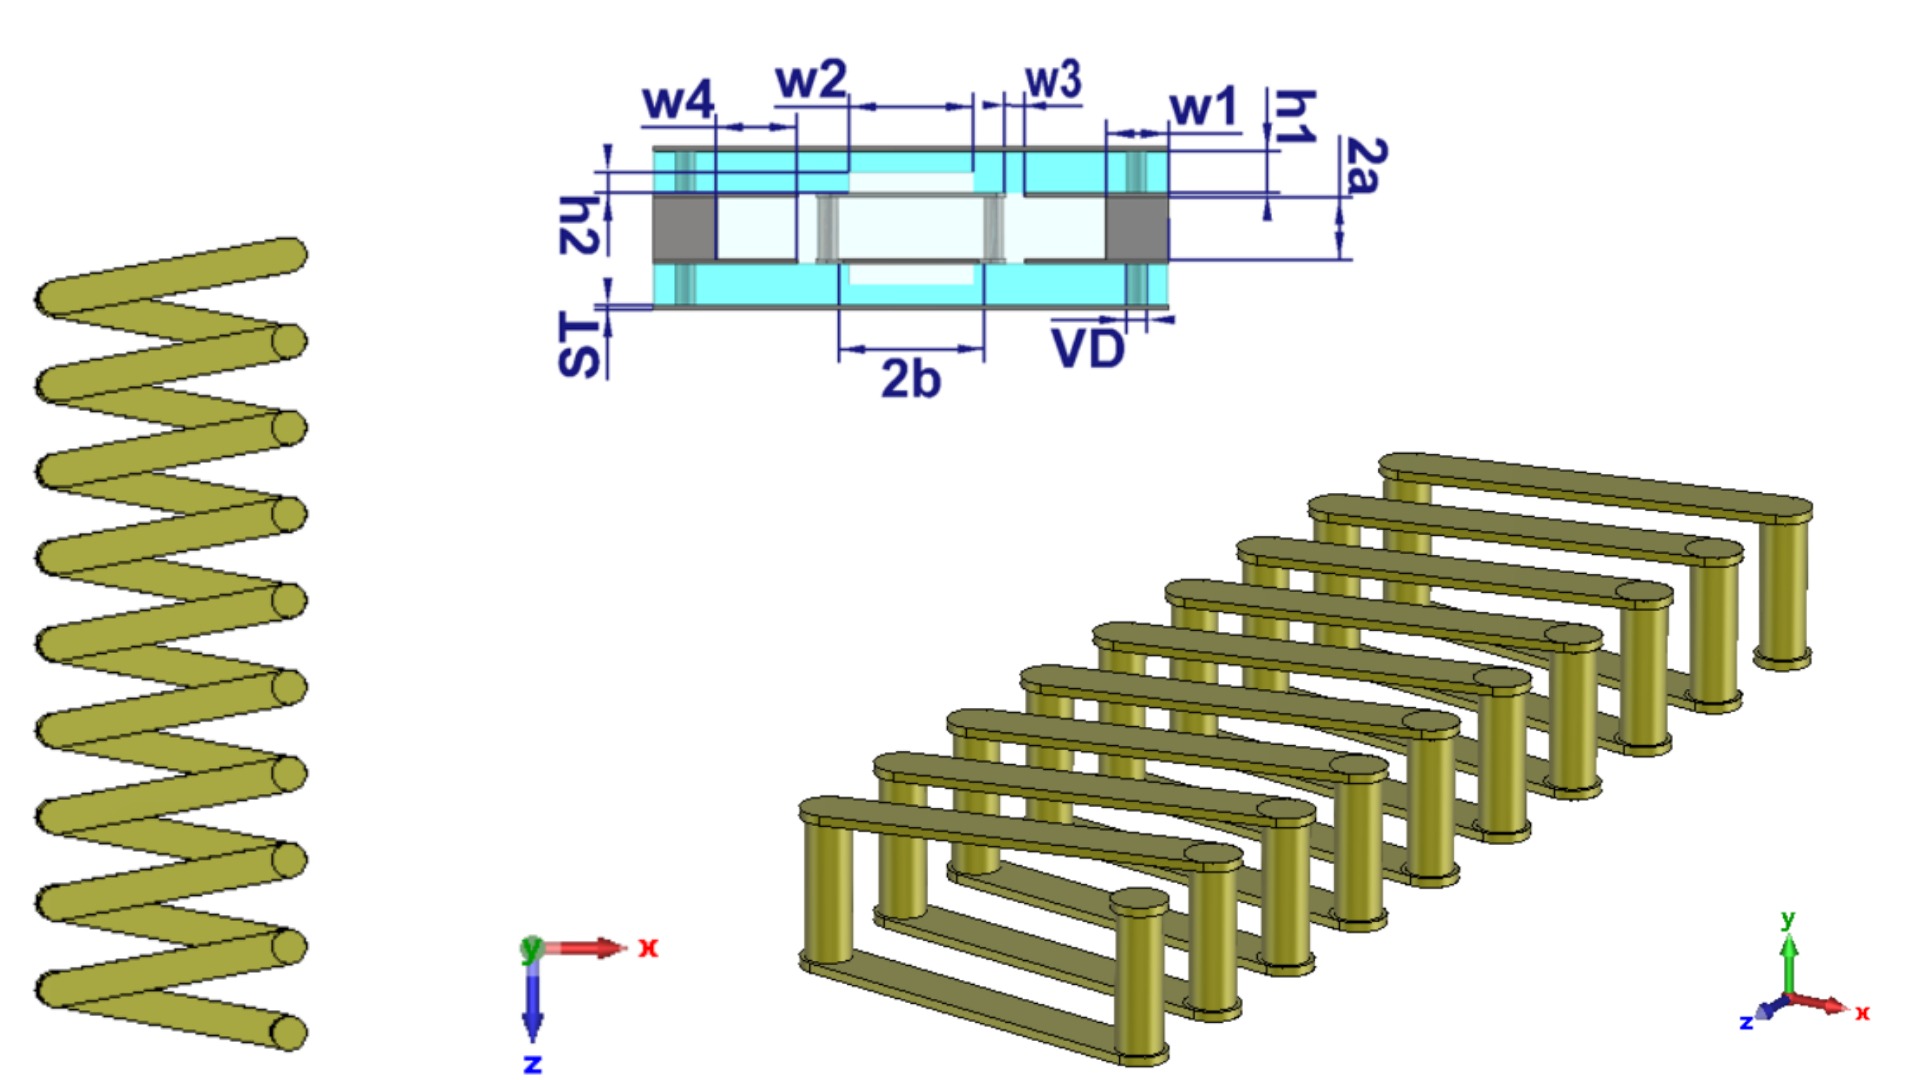 Design and study of a novel slow wave planar structure for miniaturized TWTs operating at very low voltage